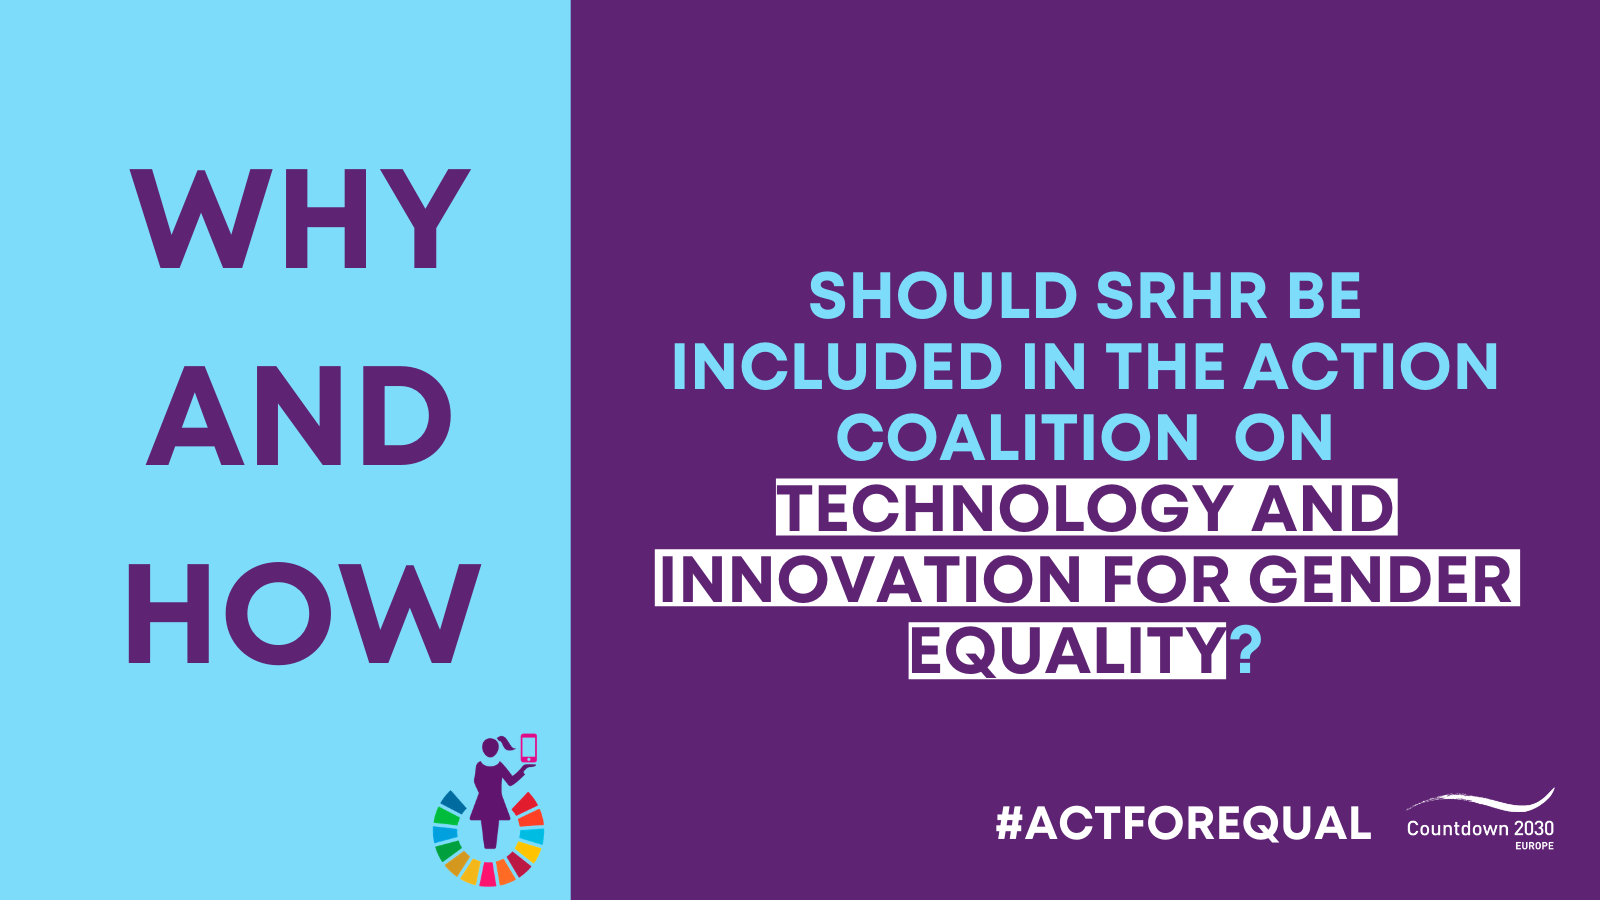 WHY AND HOW SHOULD SRHR BE INCLUDED IN THE ACTION COALITION ON TECHNOLOGY AND INNOVATION FOR GENDER EQUALITY? logo od Countdown2030Europe #actforequal